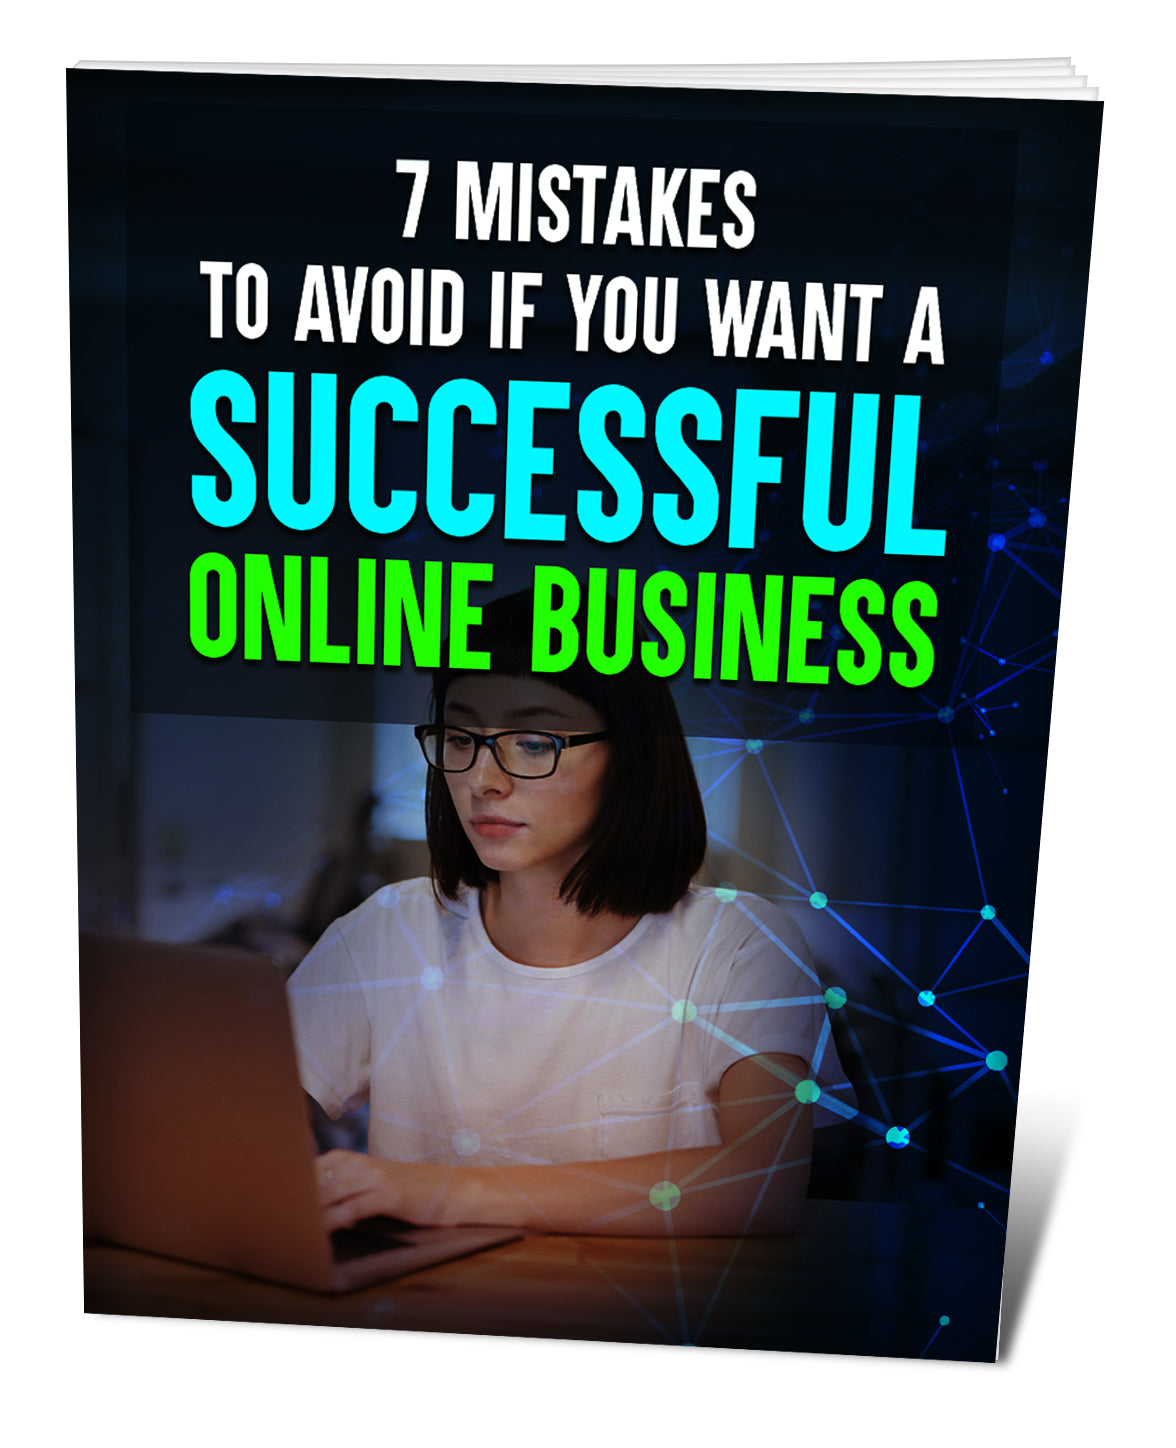 7 Mistakes to Avoid If You Want a Successful Online Business